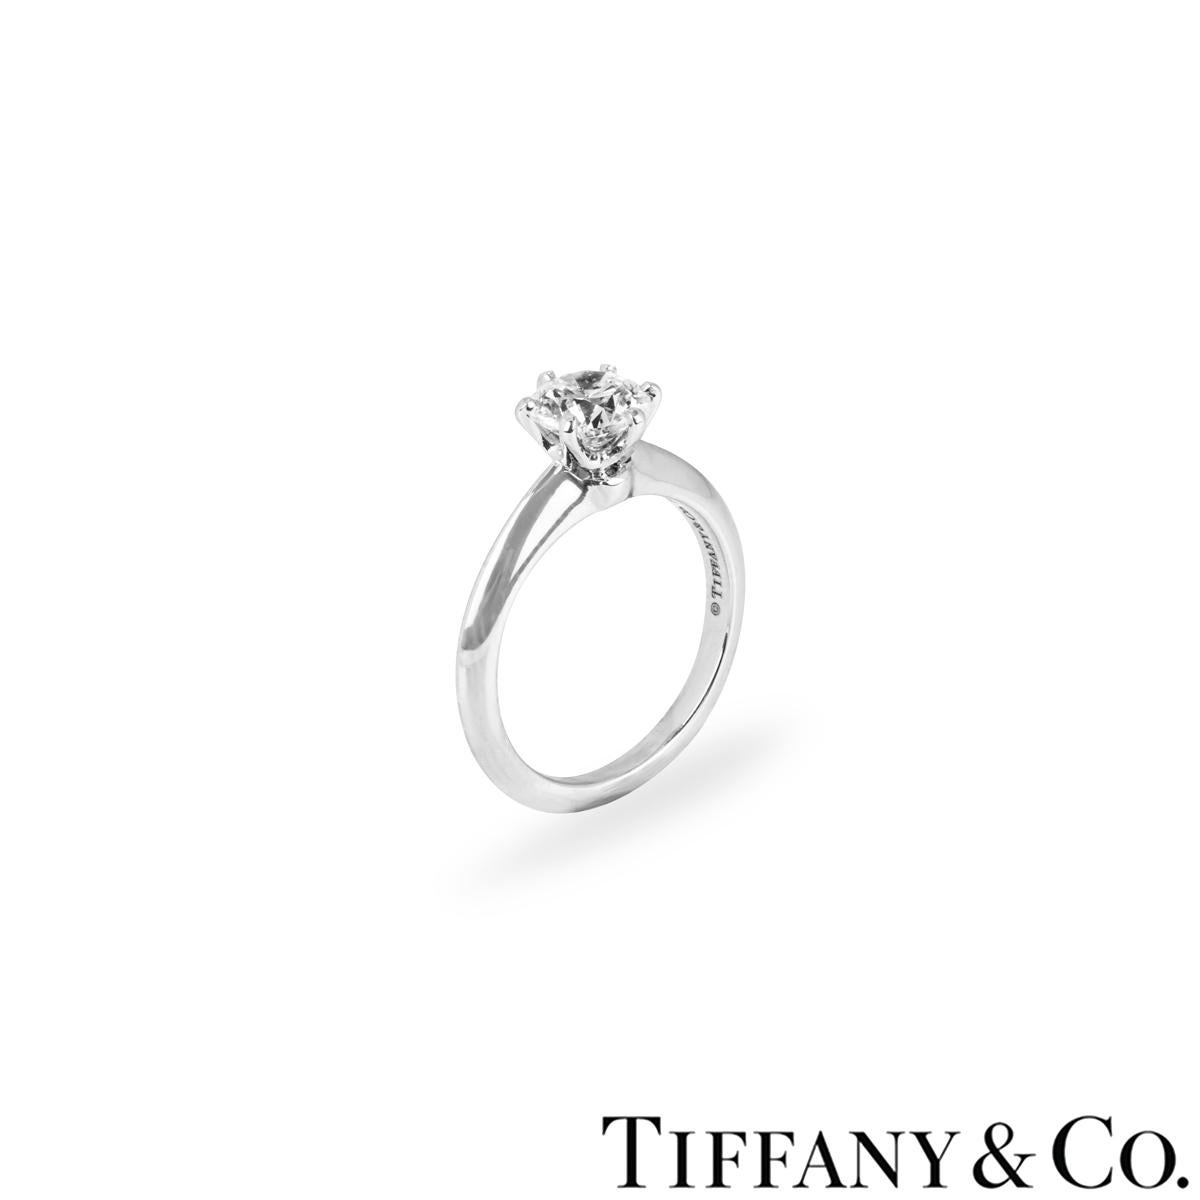 A beautiful platinum diamond ring by Tiffany & Co. from the Setting collection. The engagement ring comprises of a round brilliant cut diamond in a 6 claw setting with a weight of 1.16ct, I colour and VVS1 clarity. The diamond scores an excellent